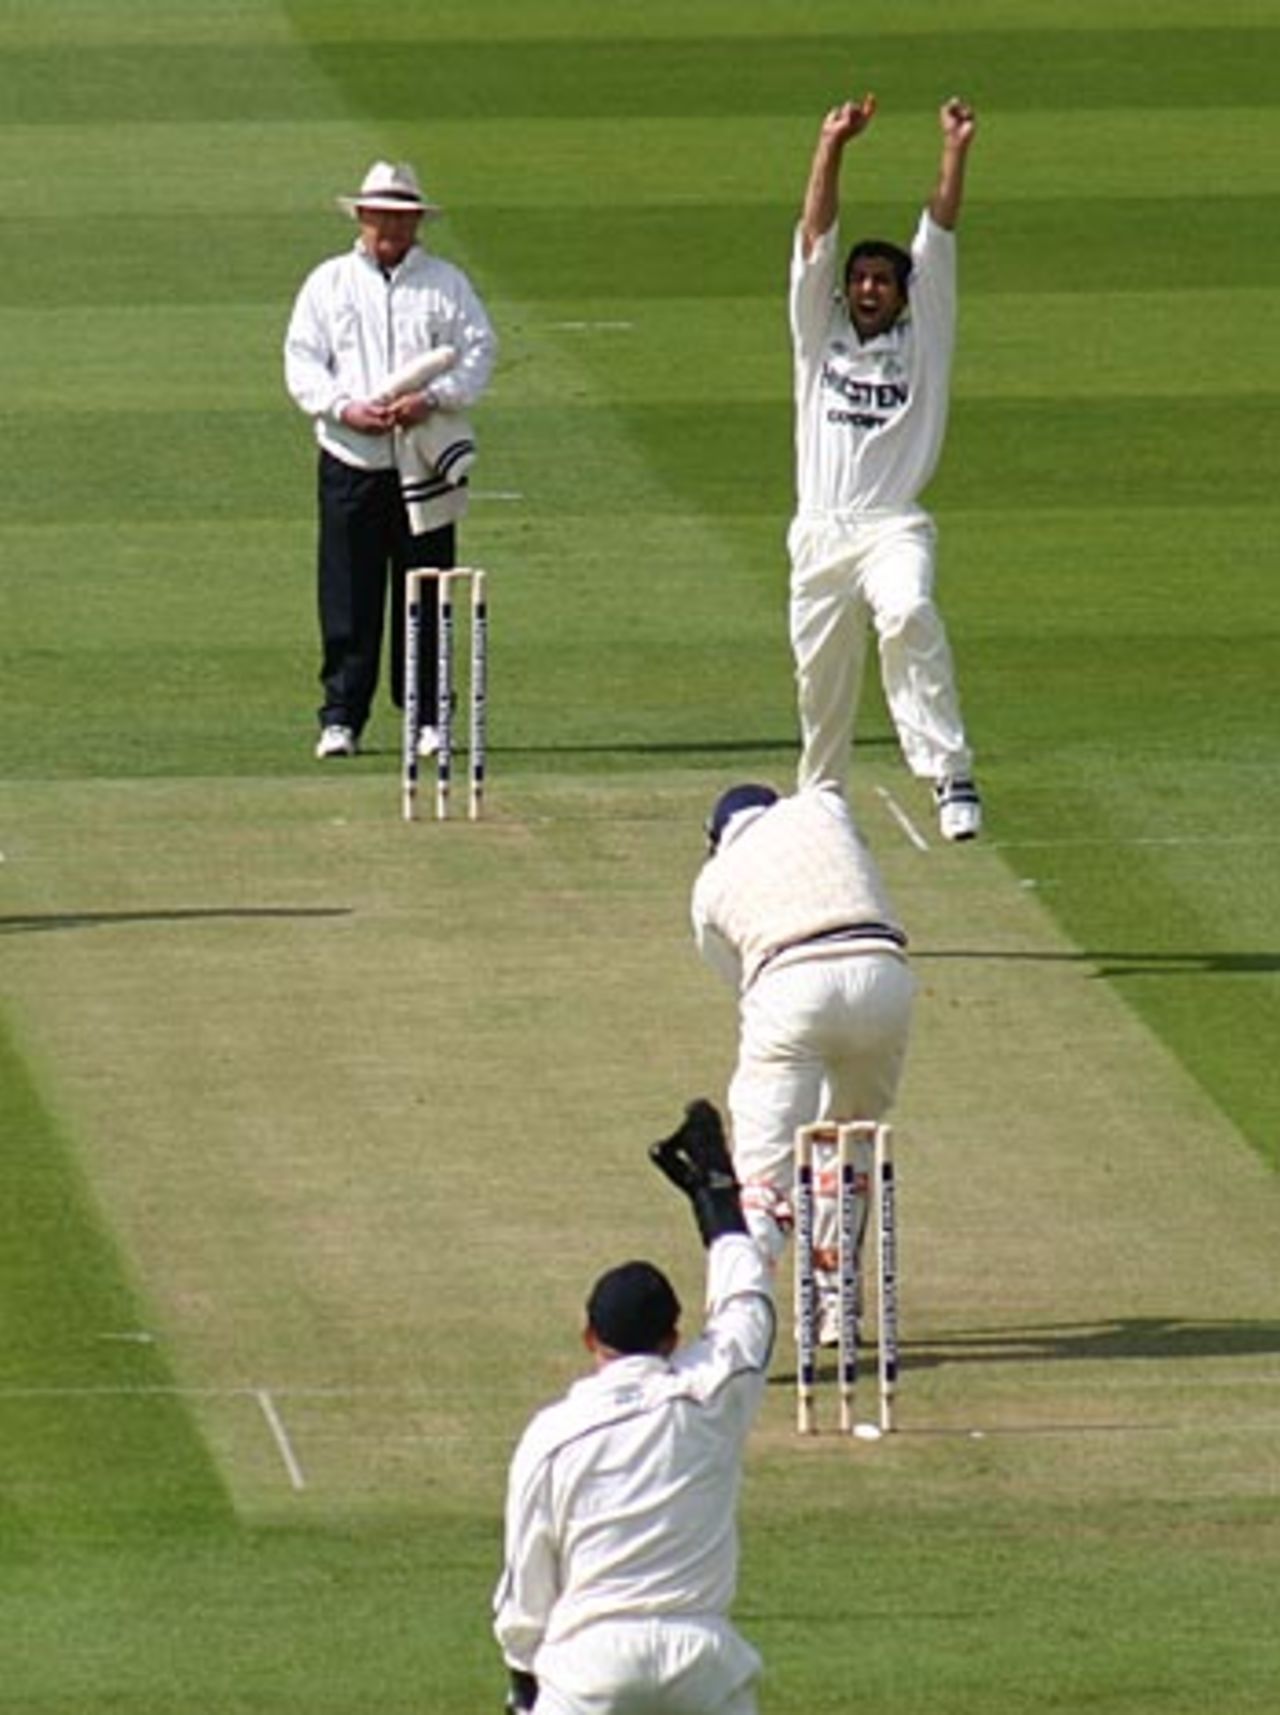 Amjad Khan appeals - unsuccessfully -  for lbw against Ben Hutton, Middlesex v Kent, Lord's, April 26, 2006